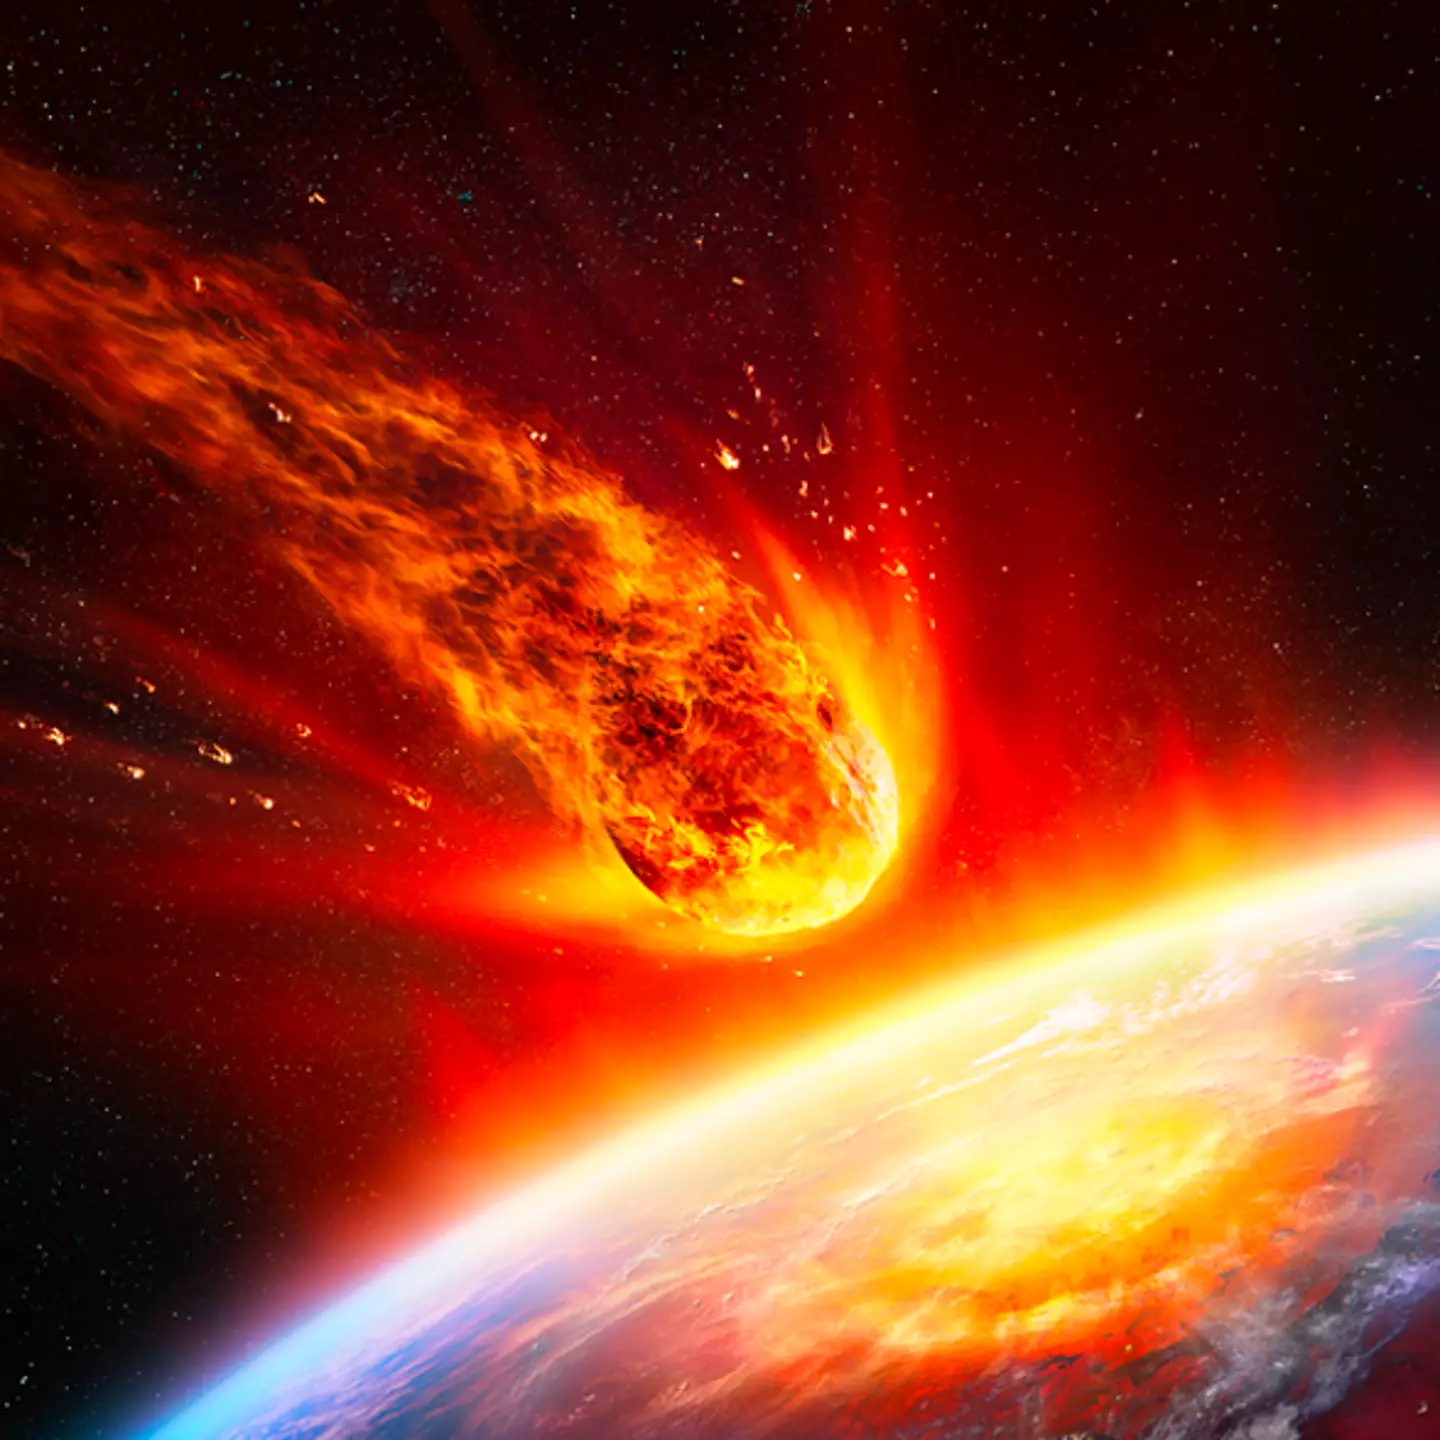 Mark your diaries: Scientists have predicted when an asteroid could hit Earth with force of 22 atomic bombs